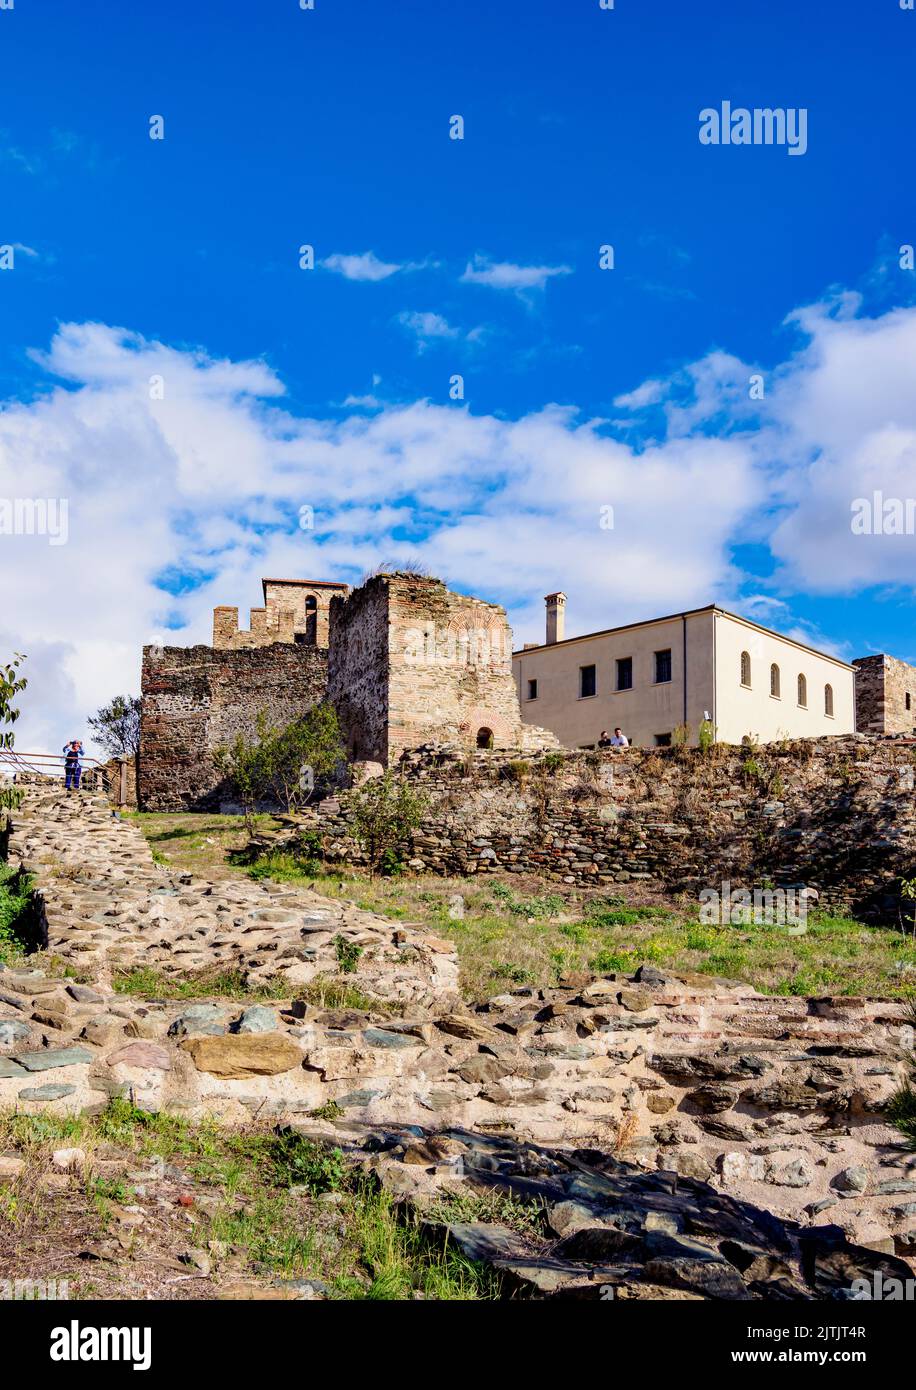 Heptapyrgion of Thessalonica, Seven Towers Citadel,Thessaloniki, Central Macedonia, Greece Stock Photo